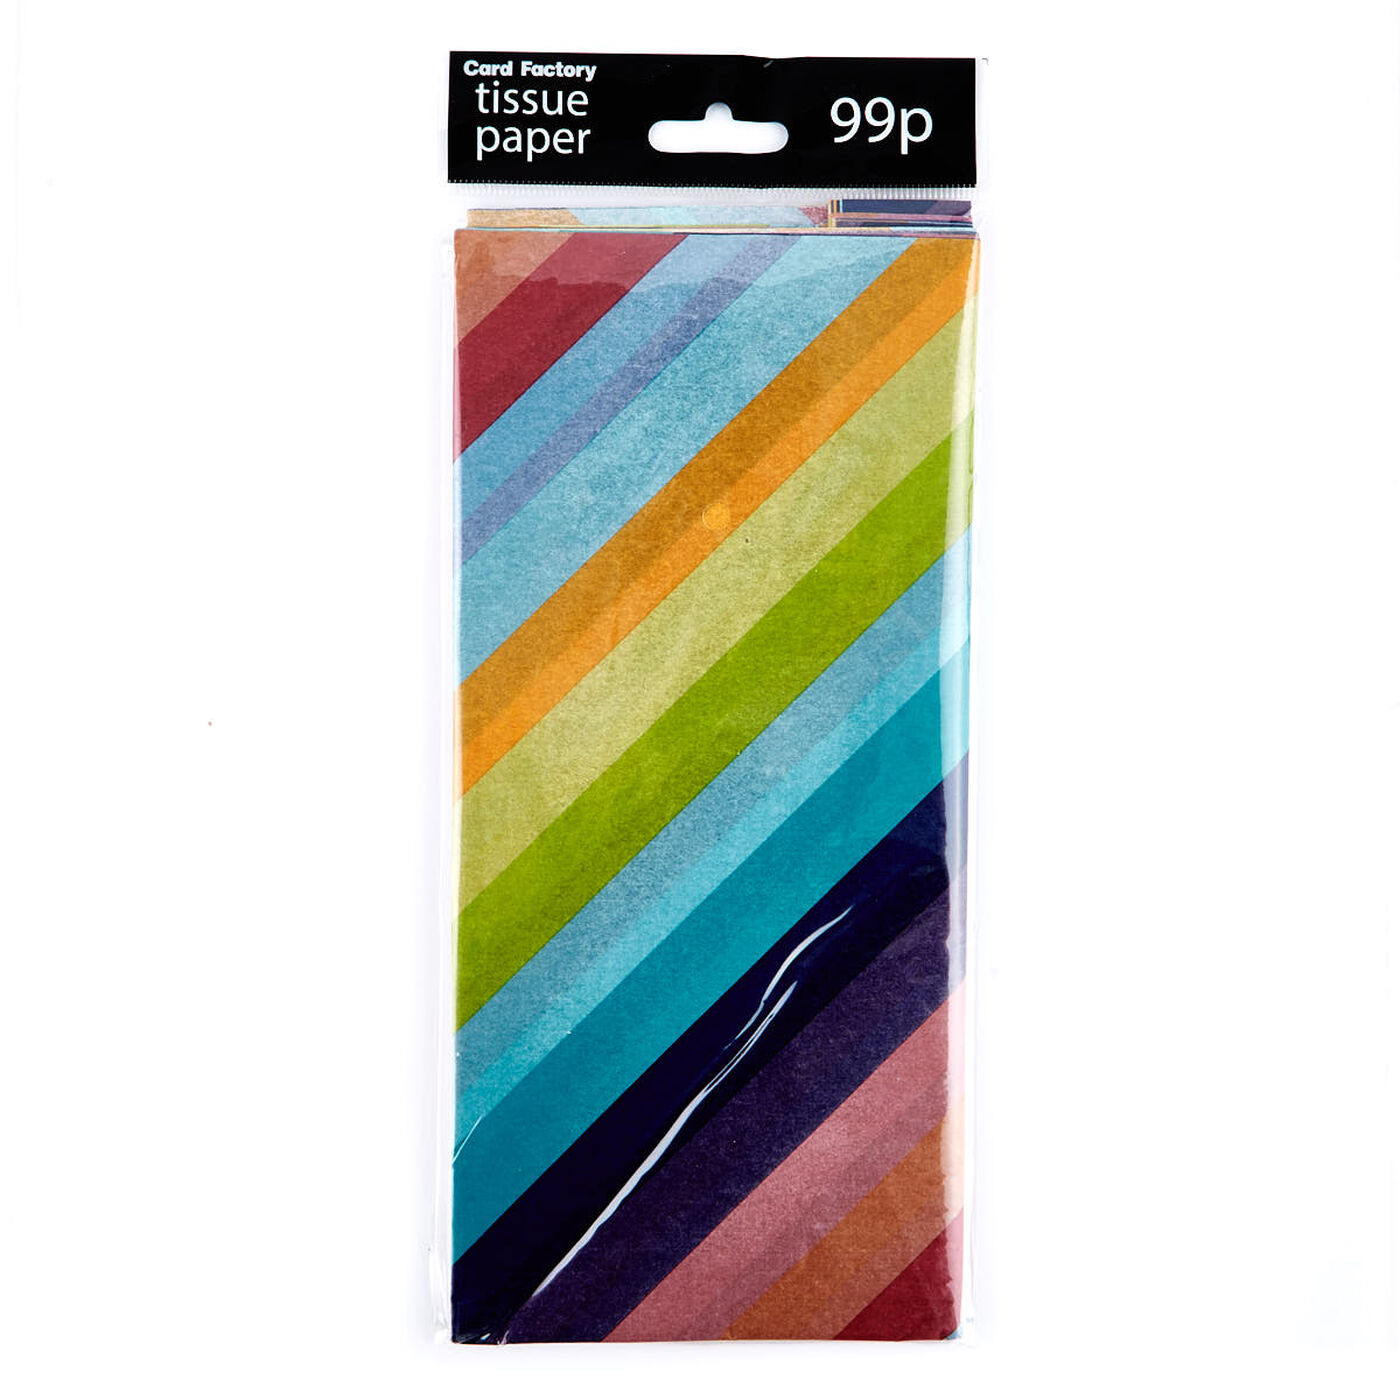 Buy Rainbow Tissue Paper - 7 Sheets for GBP 0.99